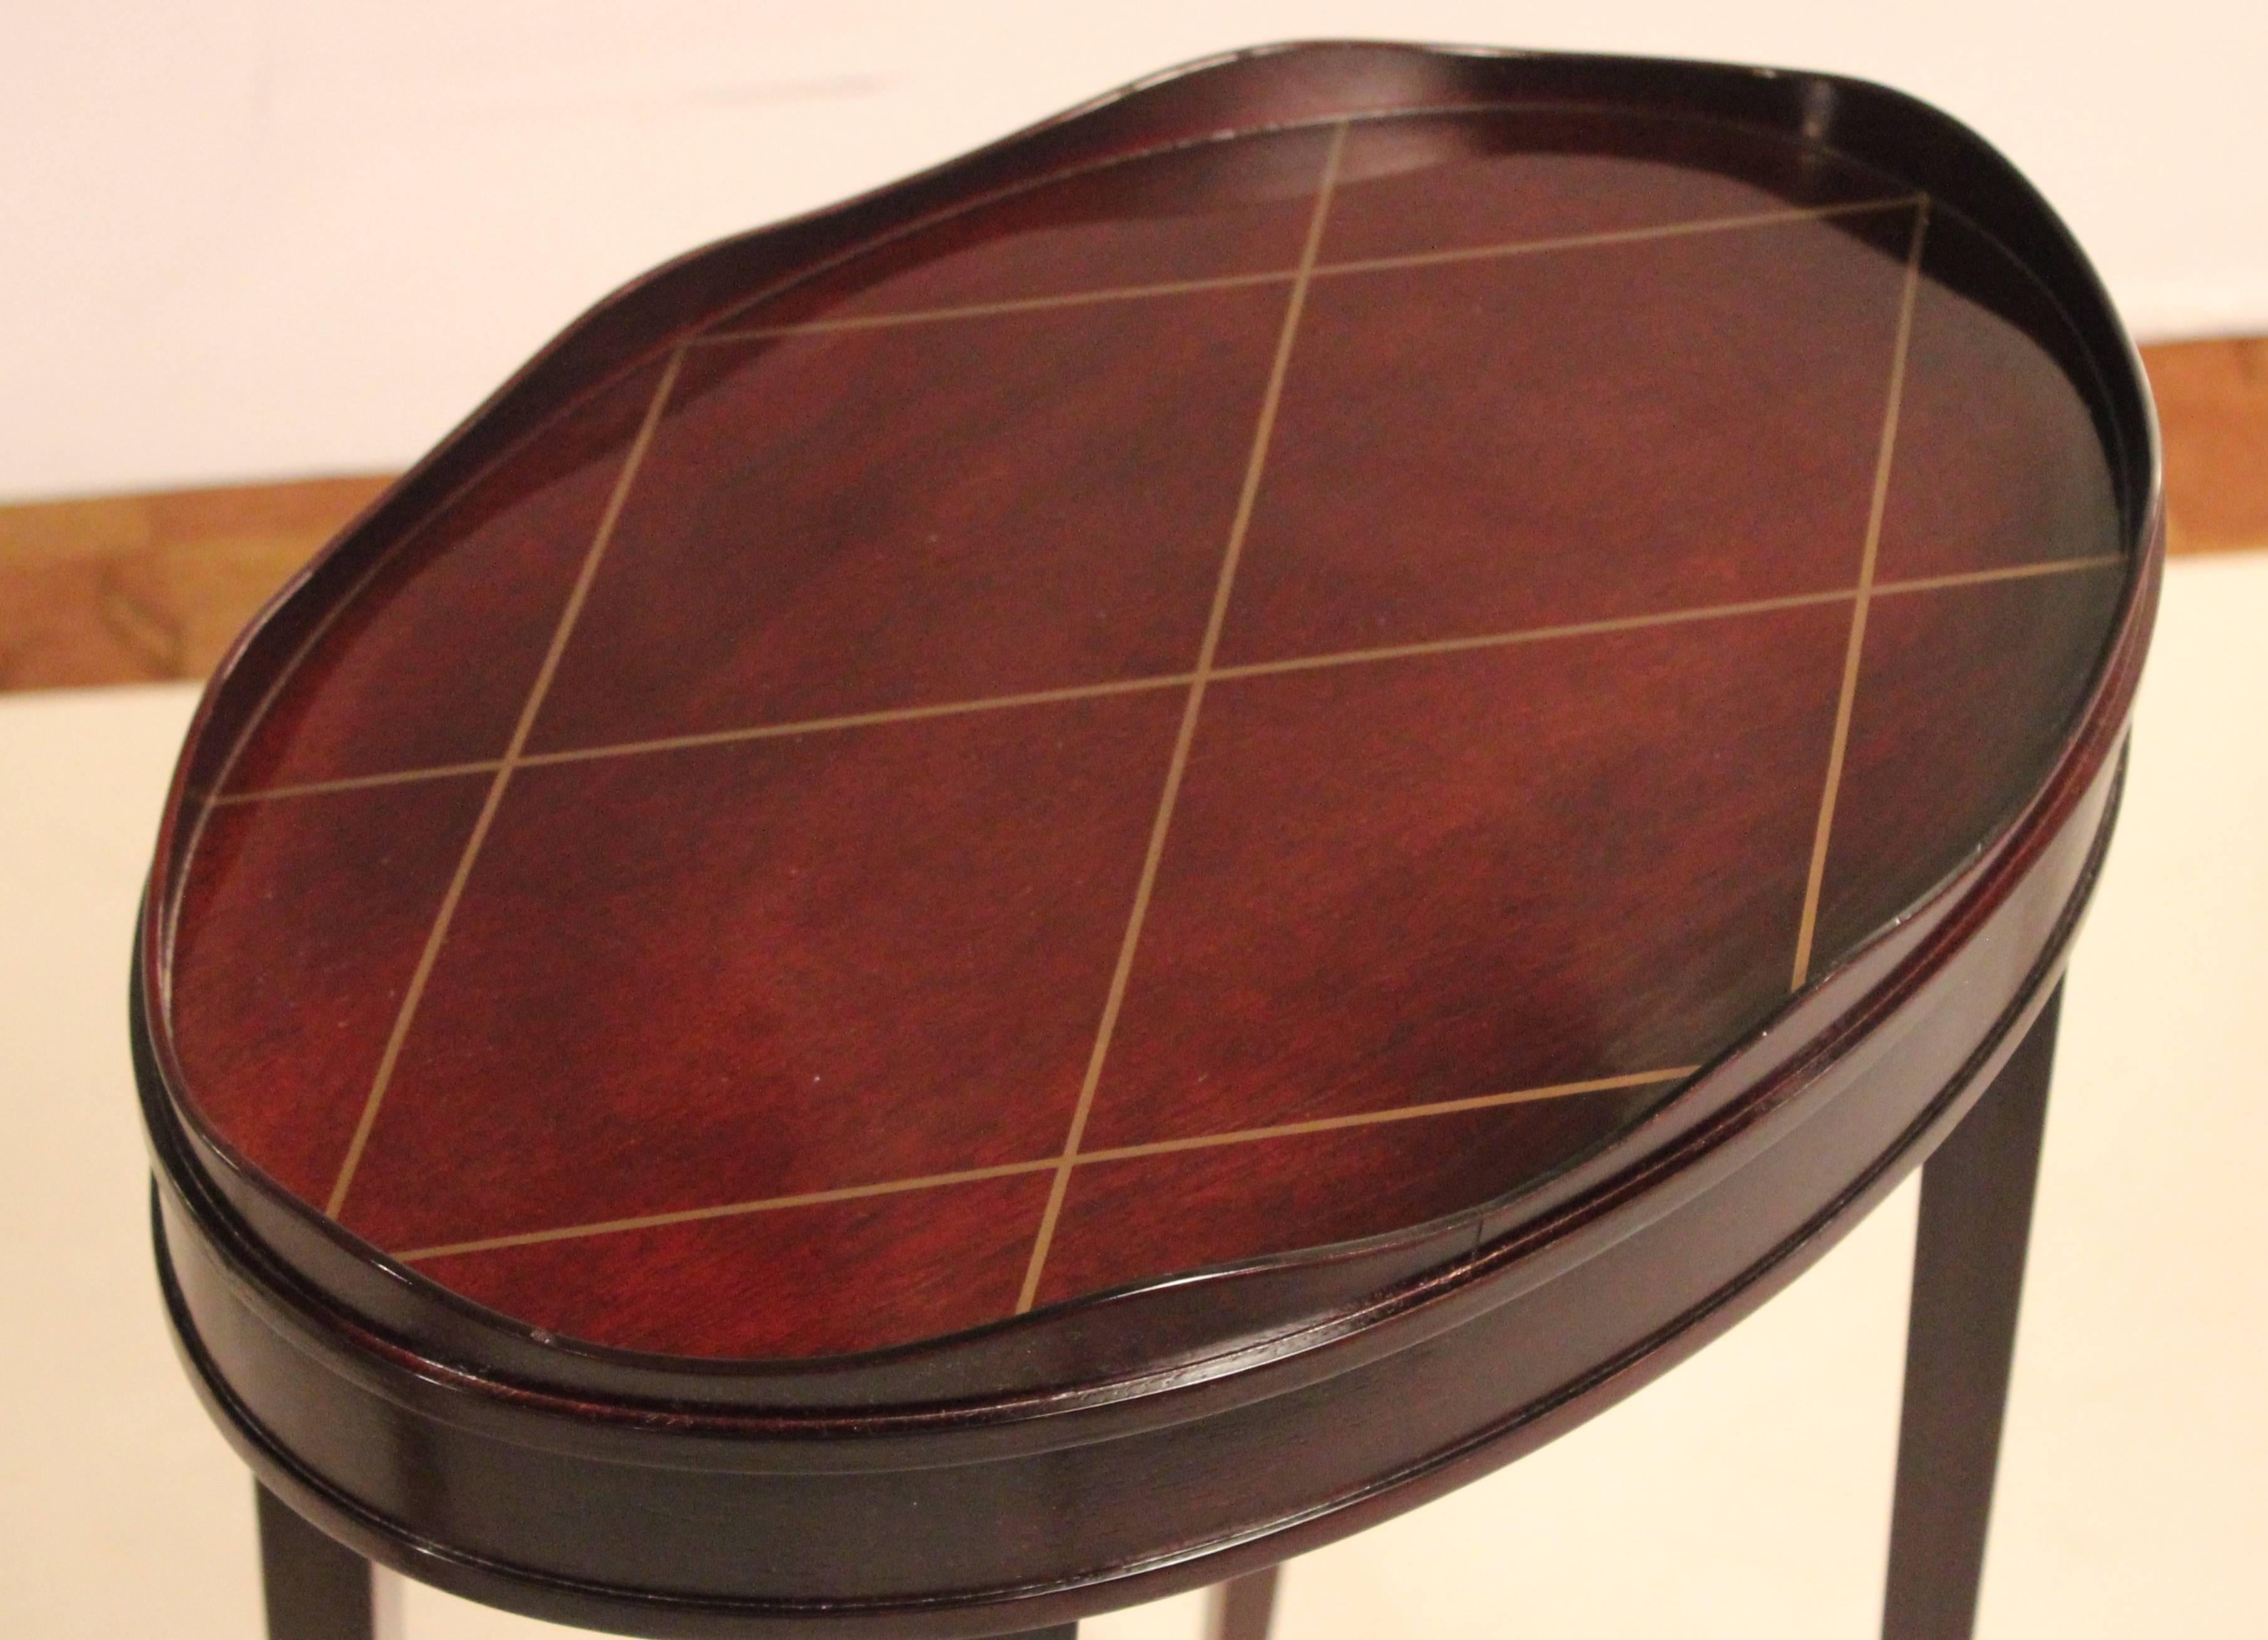 Mahogany oval accent table with gallery edge designed by Barbara Barry and made by the Baker Furniture company. Dark finish with muted gold lattice painted top. The four gently splayed legs end in an arrow style tip. This piece is best described as